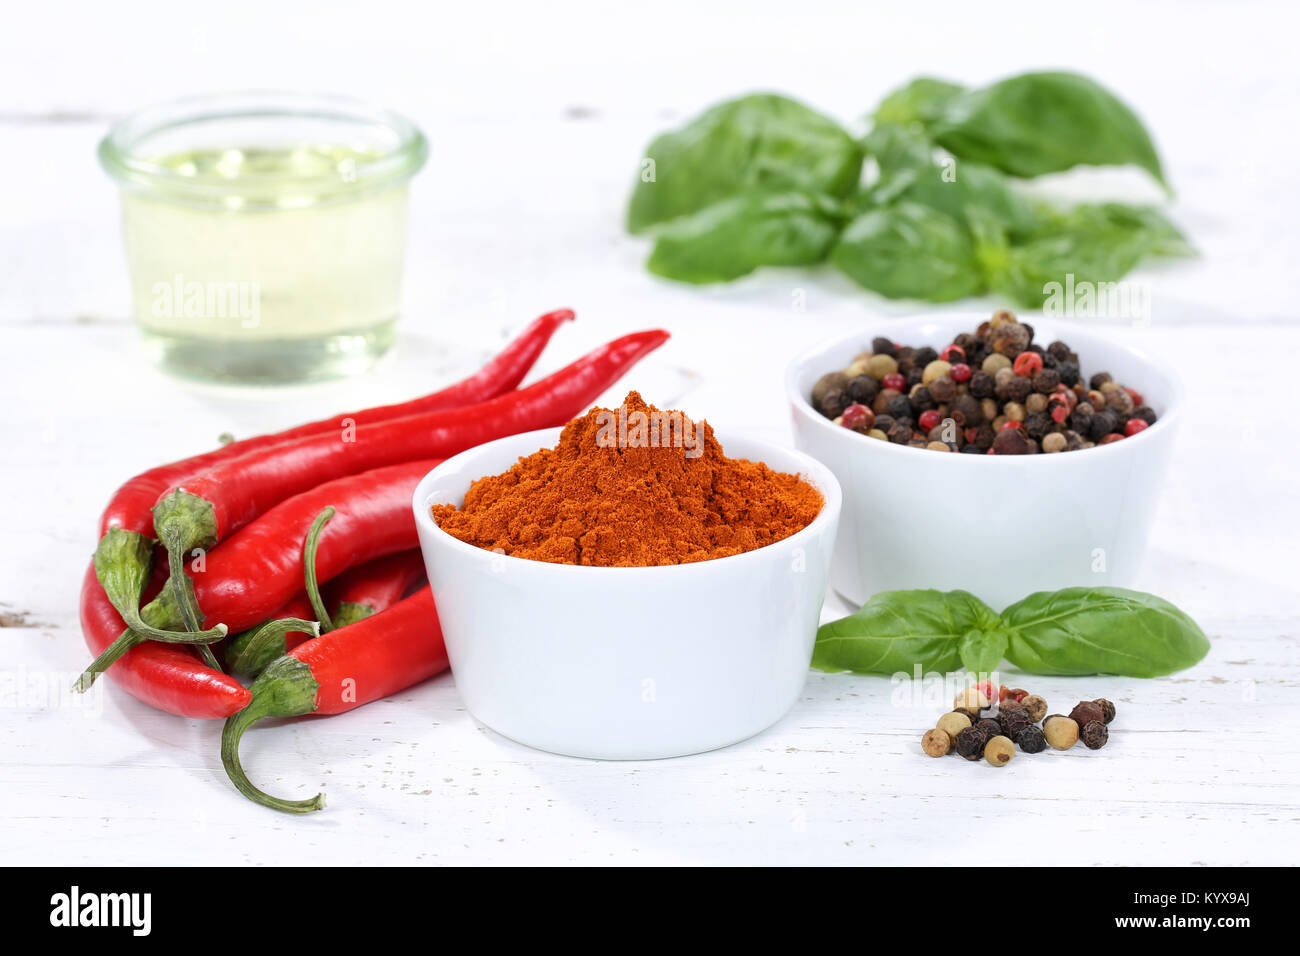 Spices cooking ingredients paprika powder spicy red hot chili peppers chilli spice Stock Photo